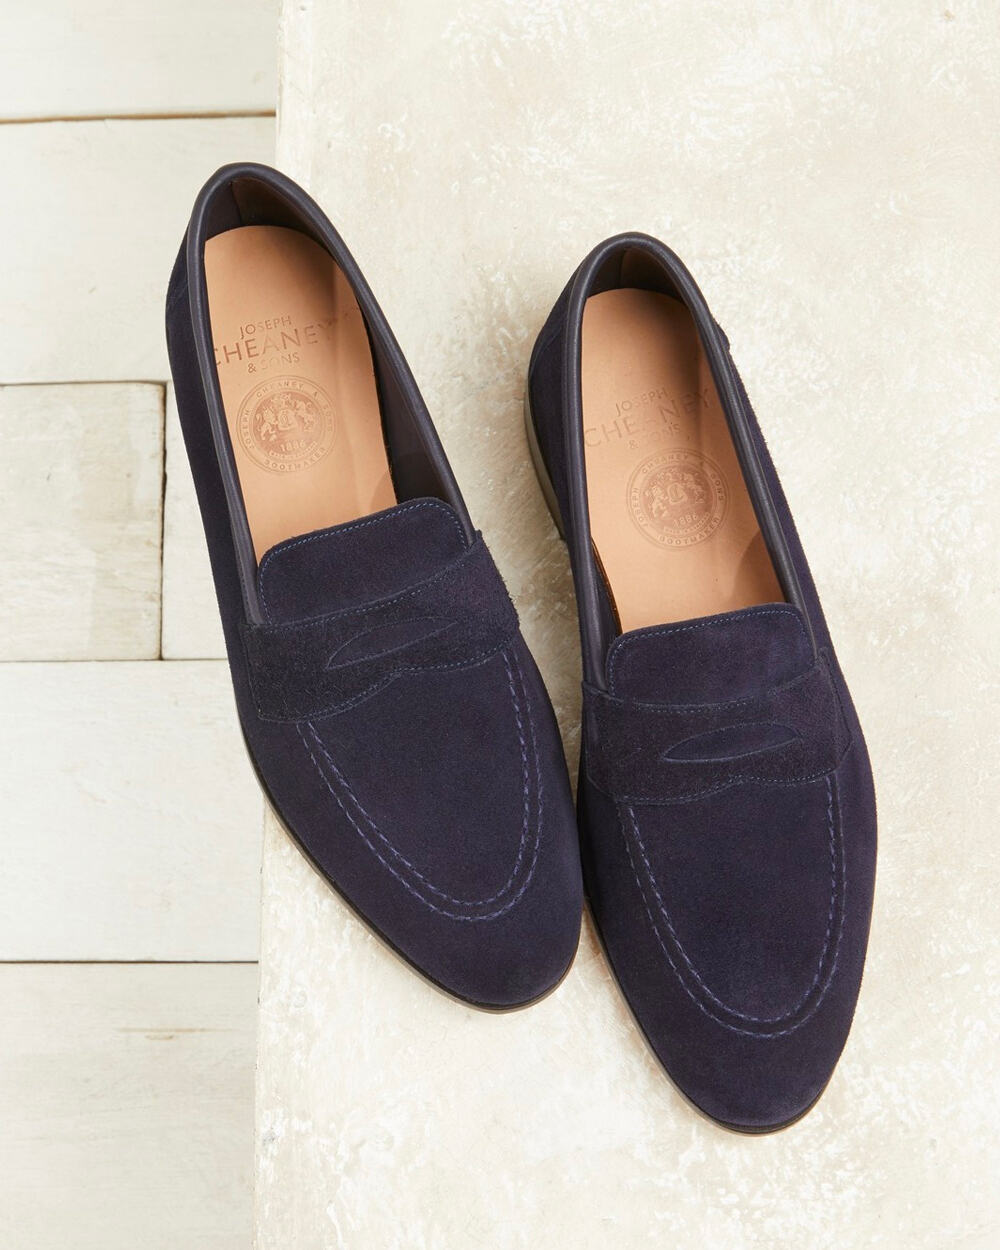 A pair of men's navy suede penny loafers by Cheaney